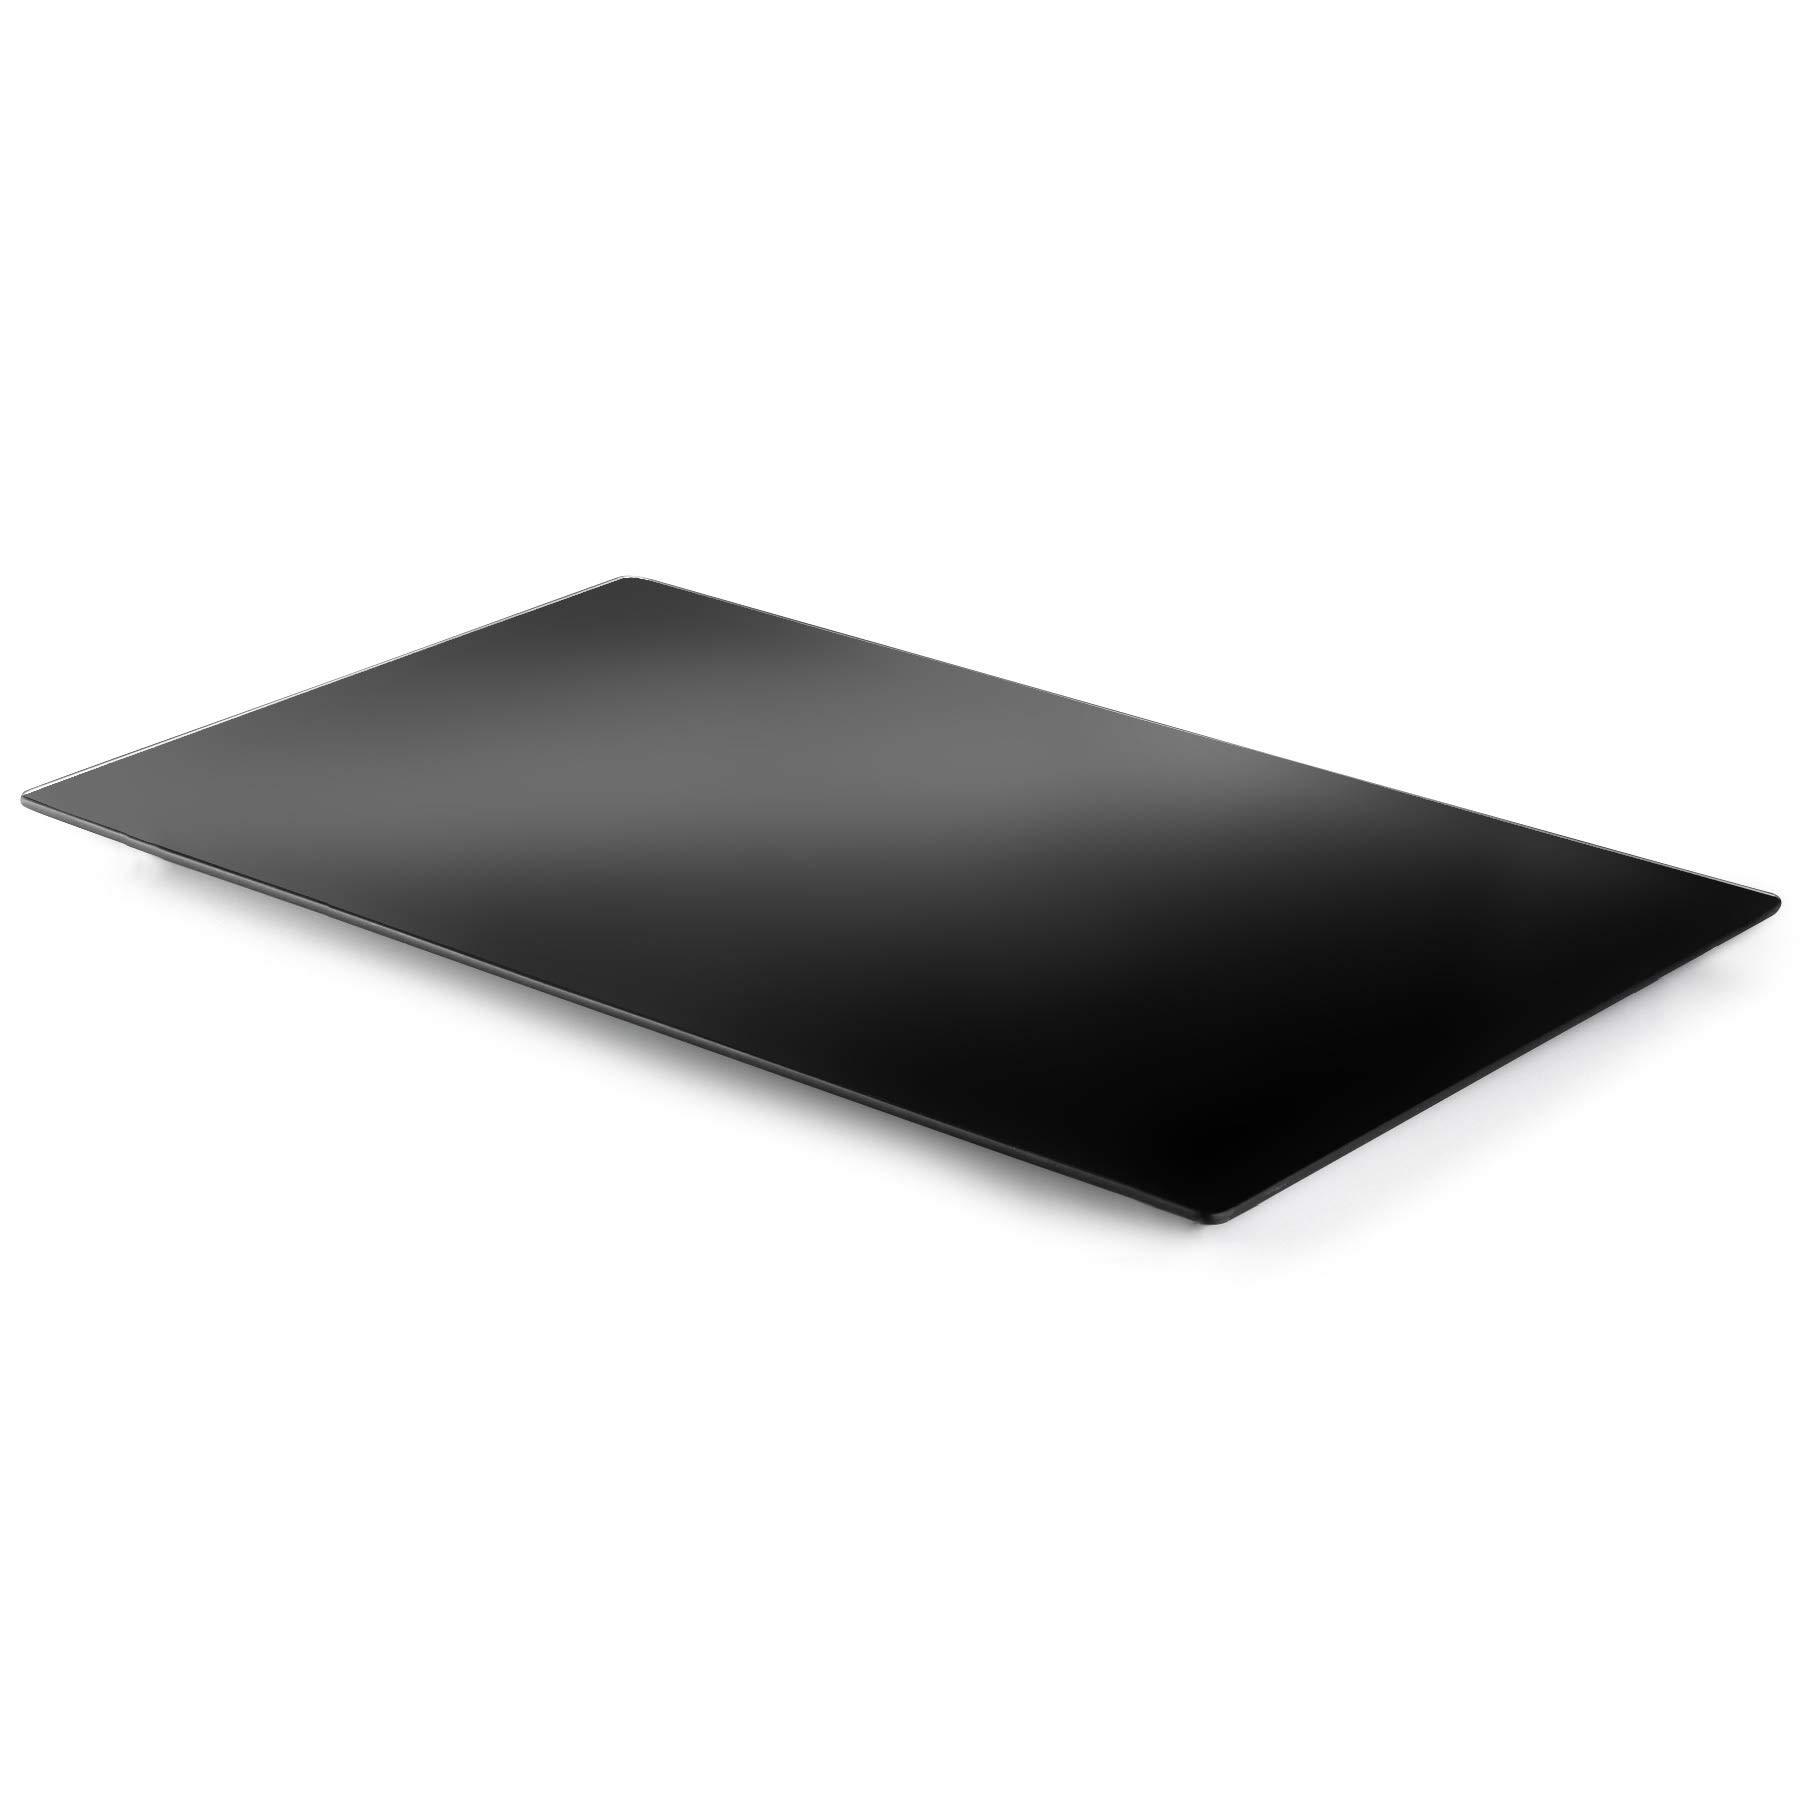 PARNOO tempered black glass cutting board - long lasting black ink glass - scratch resistant, heat resistant, shatter resistant, dis